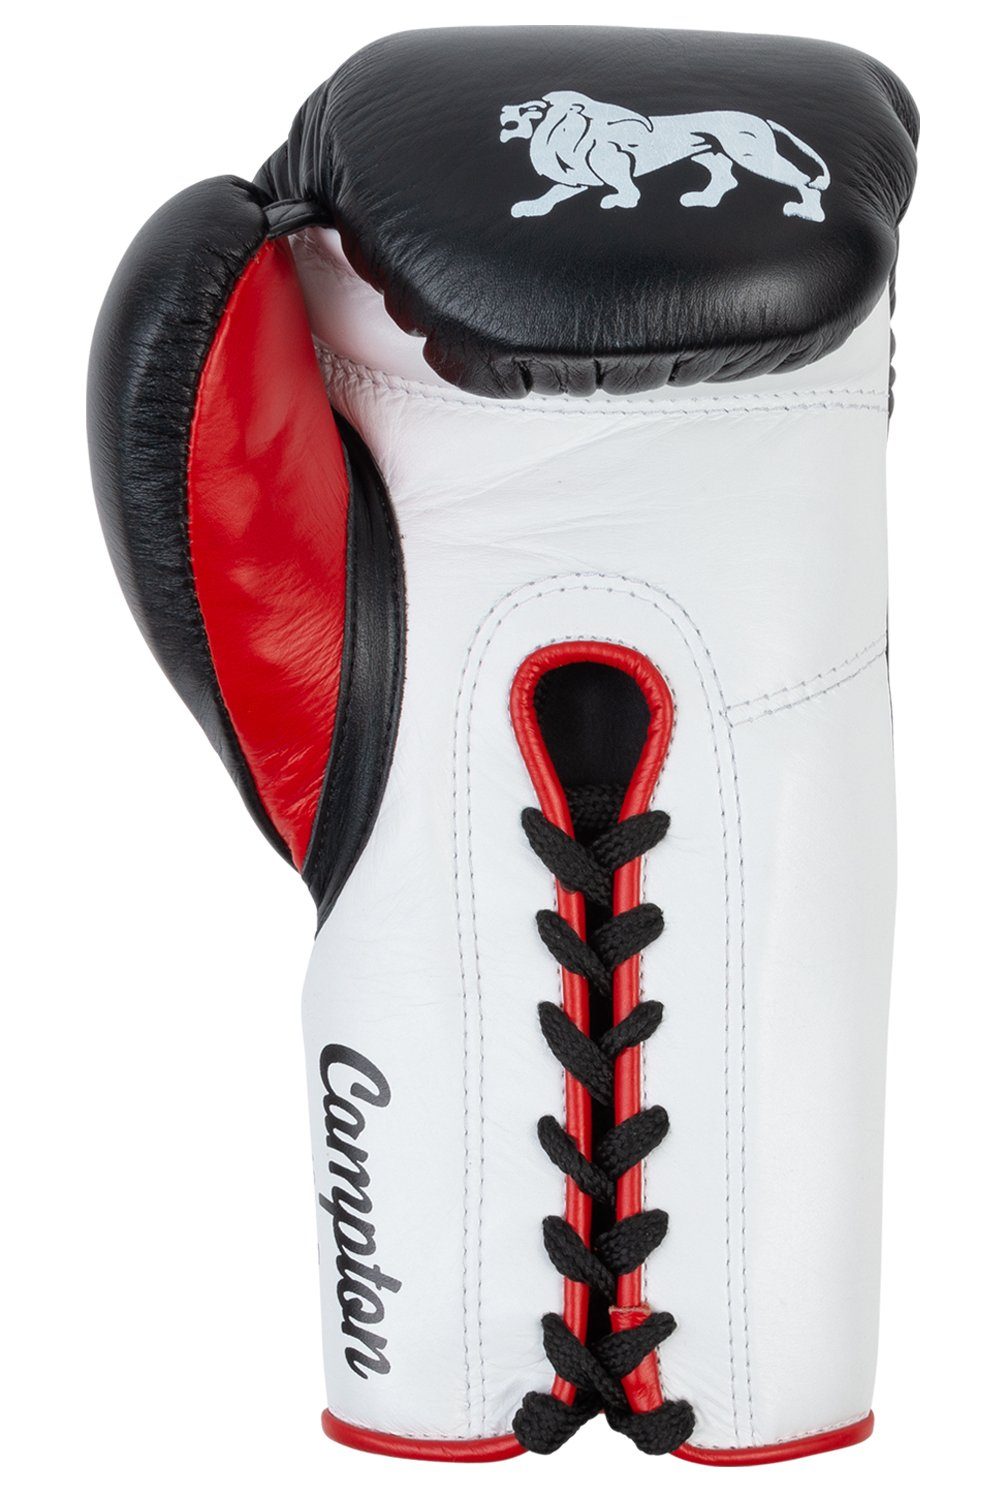 Lonsdale Black/White/Red Boxhandschuhe CAMPTON